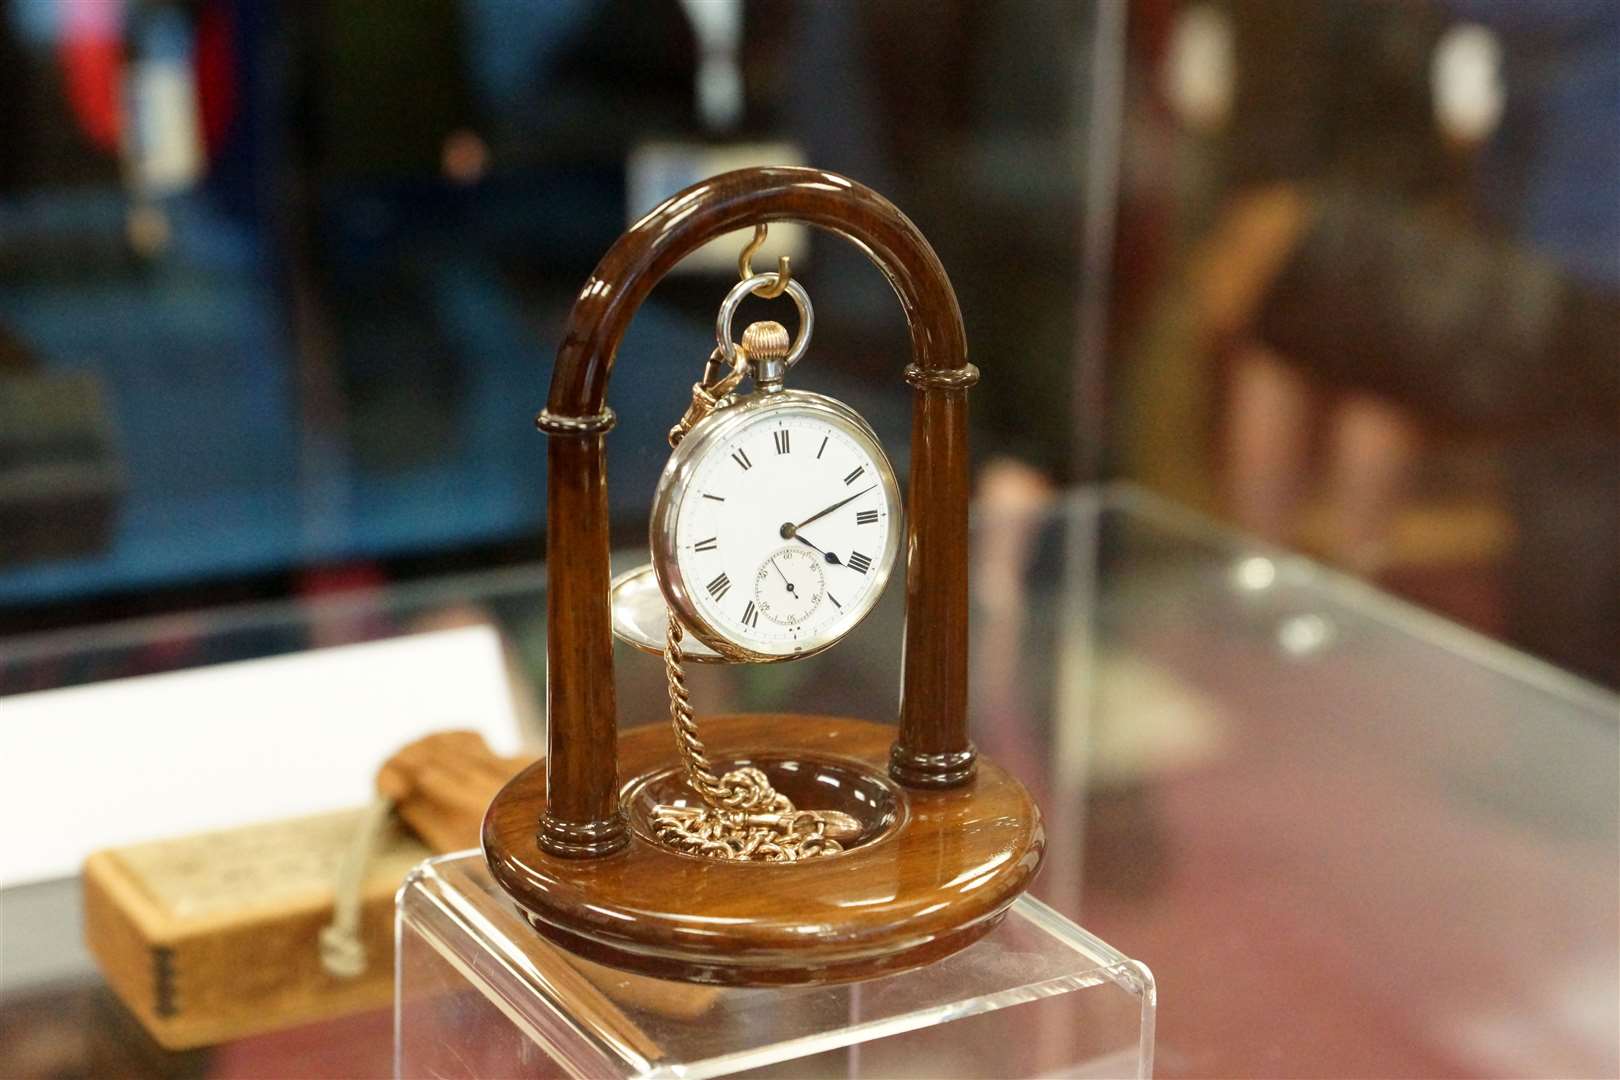 The pocket watch was previously gifted to a seaman who saved the life of the countess (Glenrothes & Area Heritage Centre/PA)